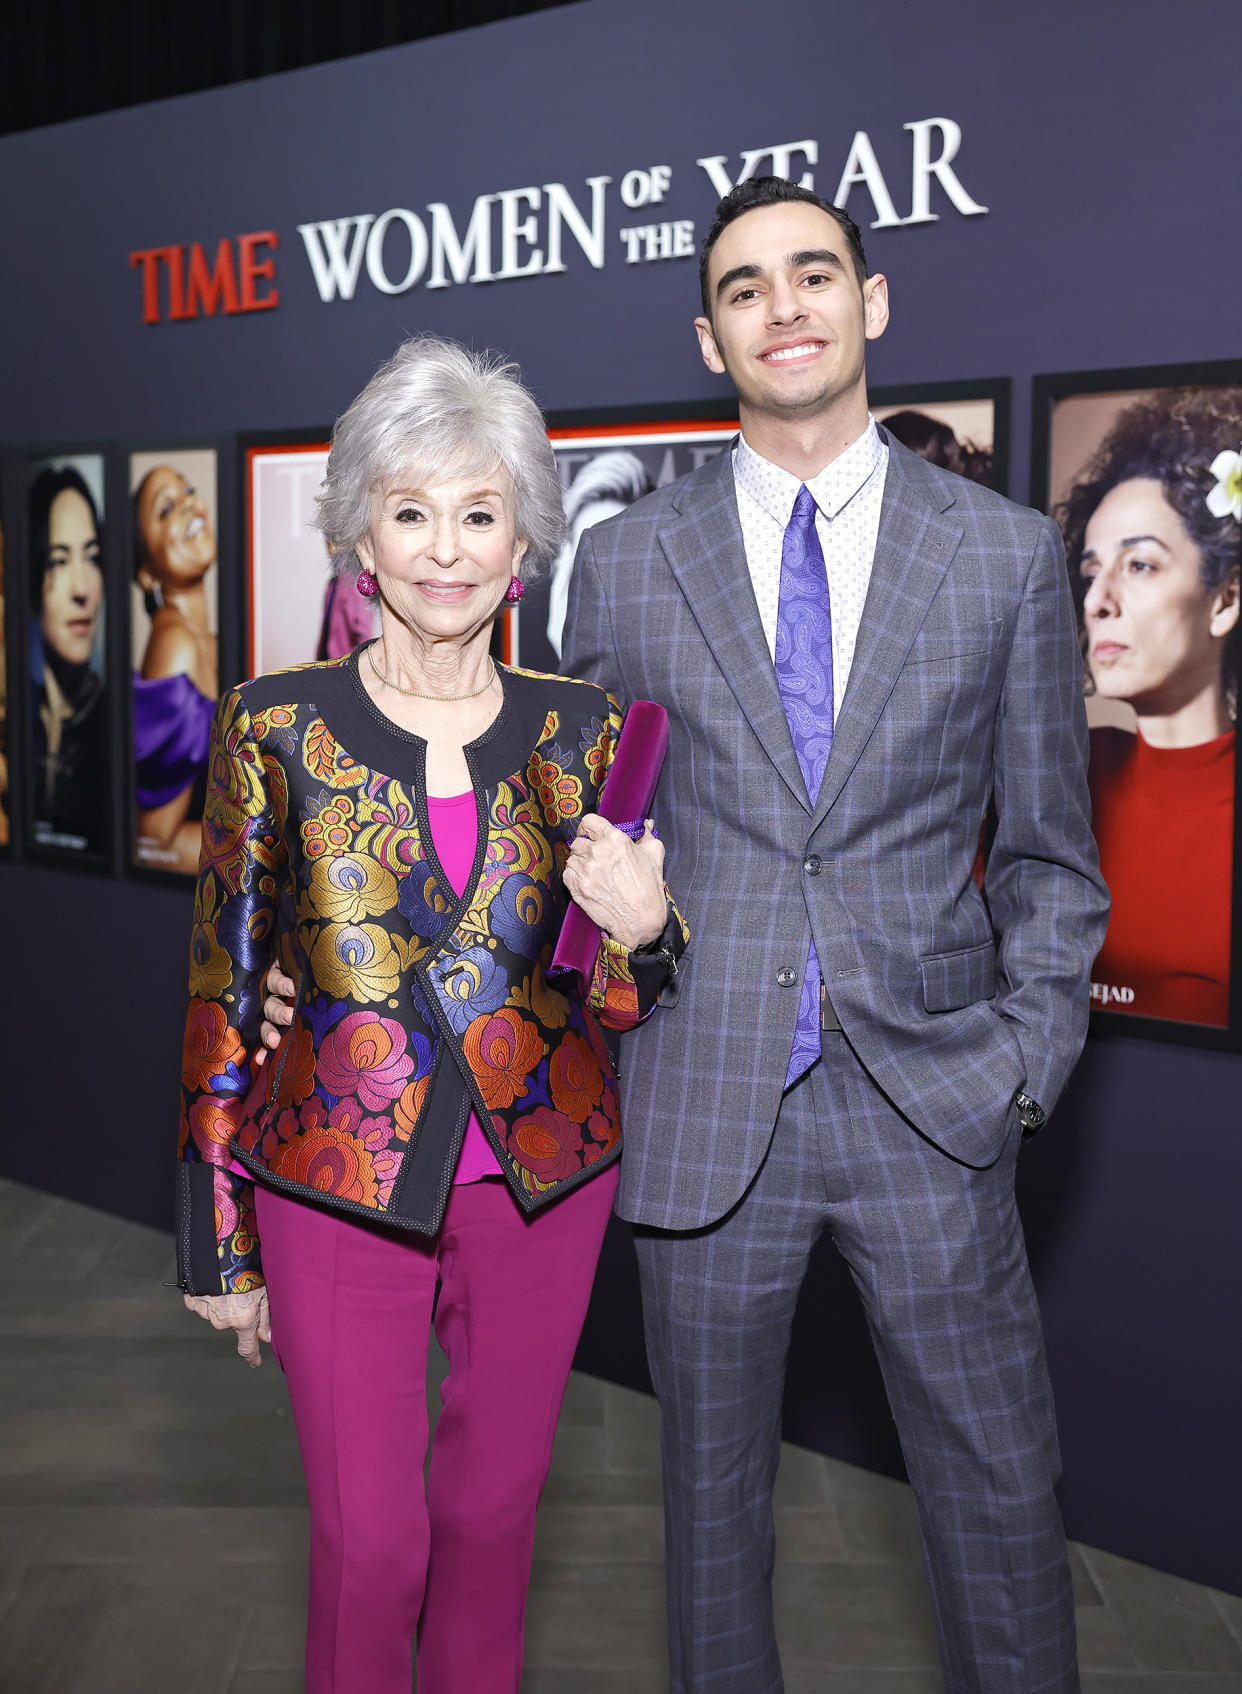 Rita Moreno and grandson Justin Fisher at TIME Women of the Year on March 08, 2023 in Los Angeles, CA. (Stefanie Keenan / Getty Images for TIME)